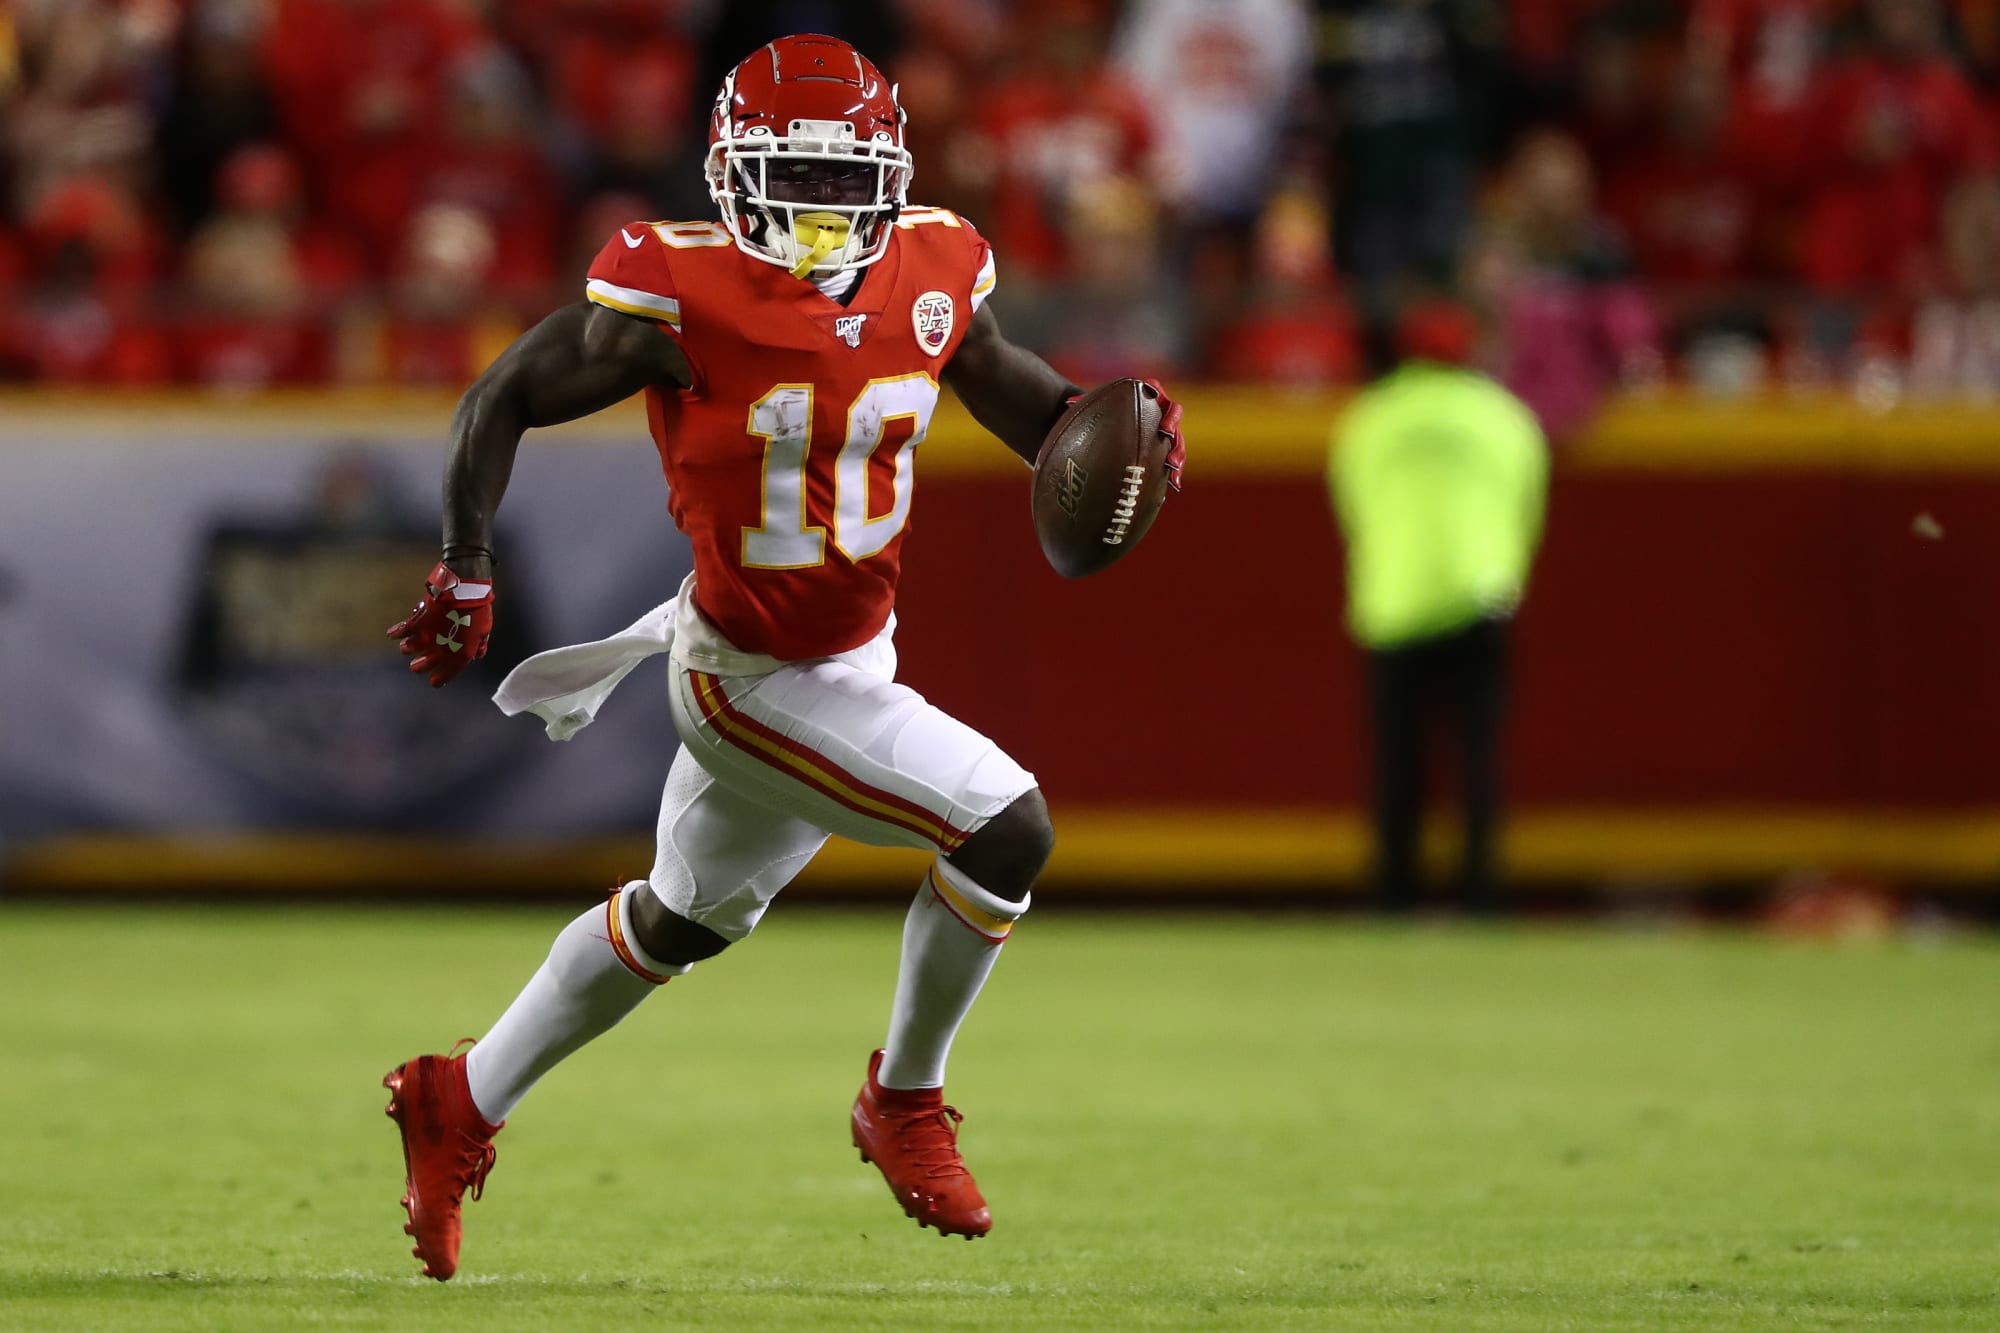 Tyreek Hill says he's ready to race anyone in the NFL